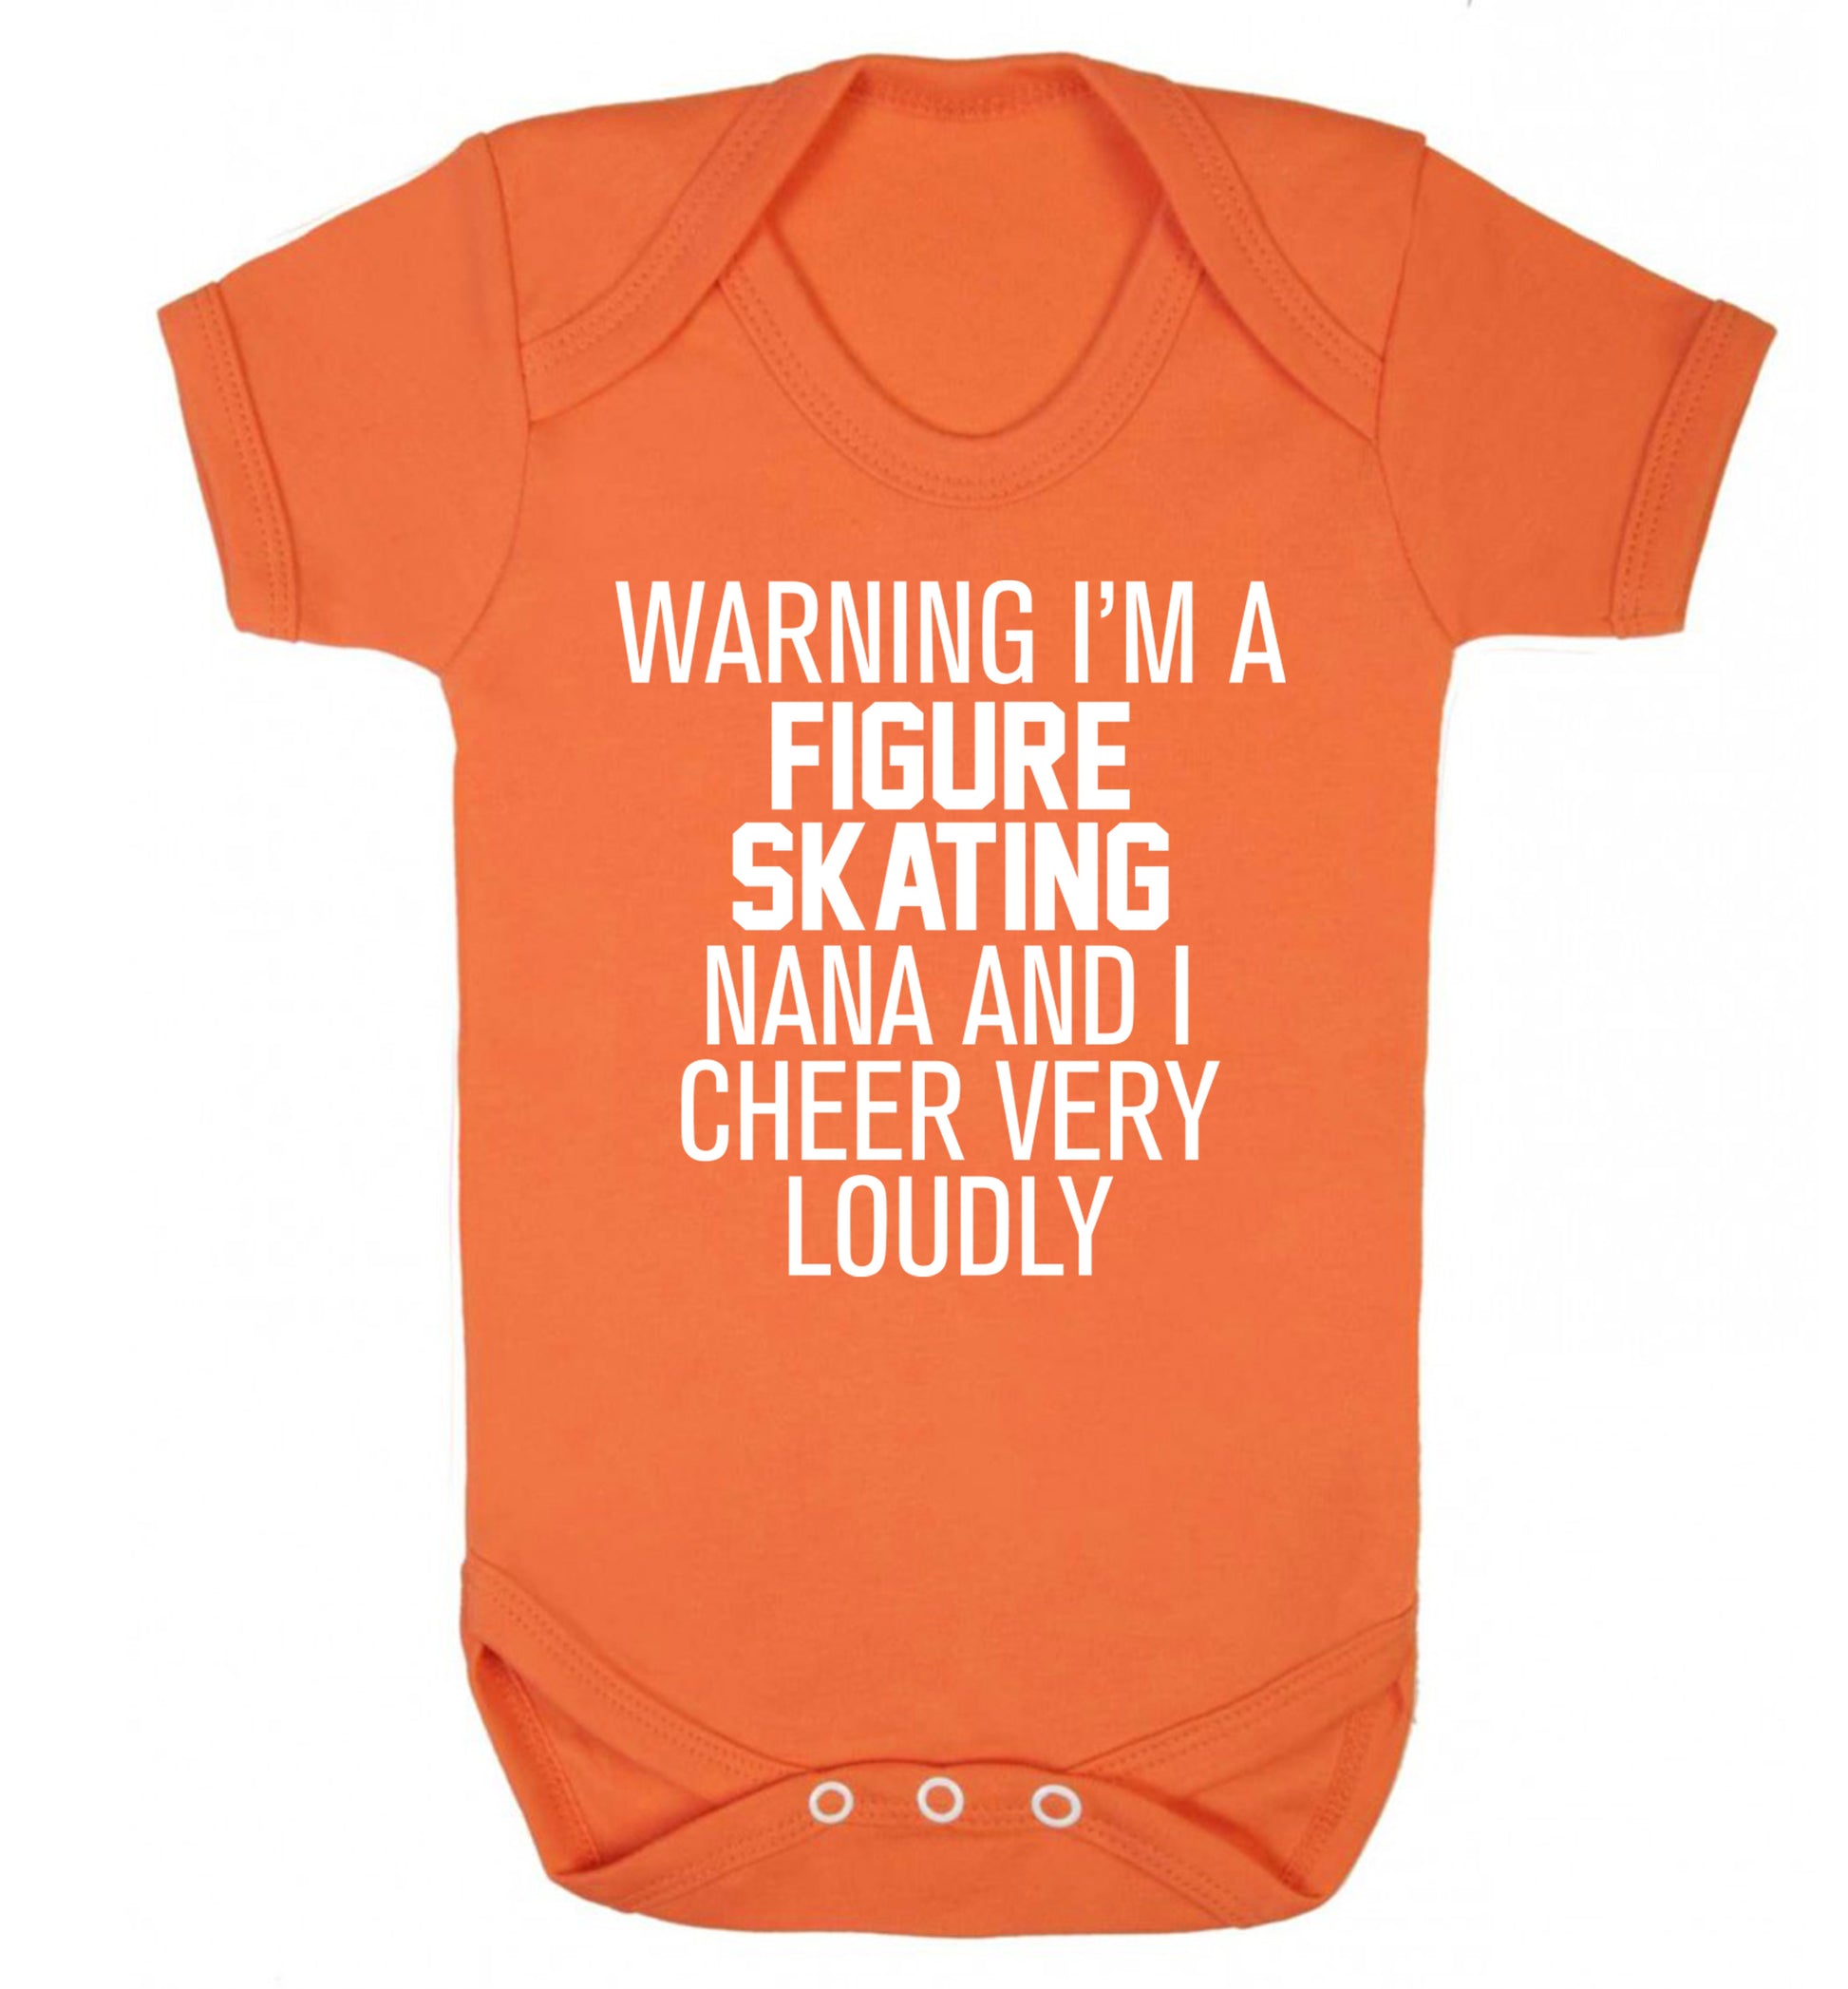 Warning I'm a figure skating nana and I cheer very loudly Baby Vest orange 18-24 months